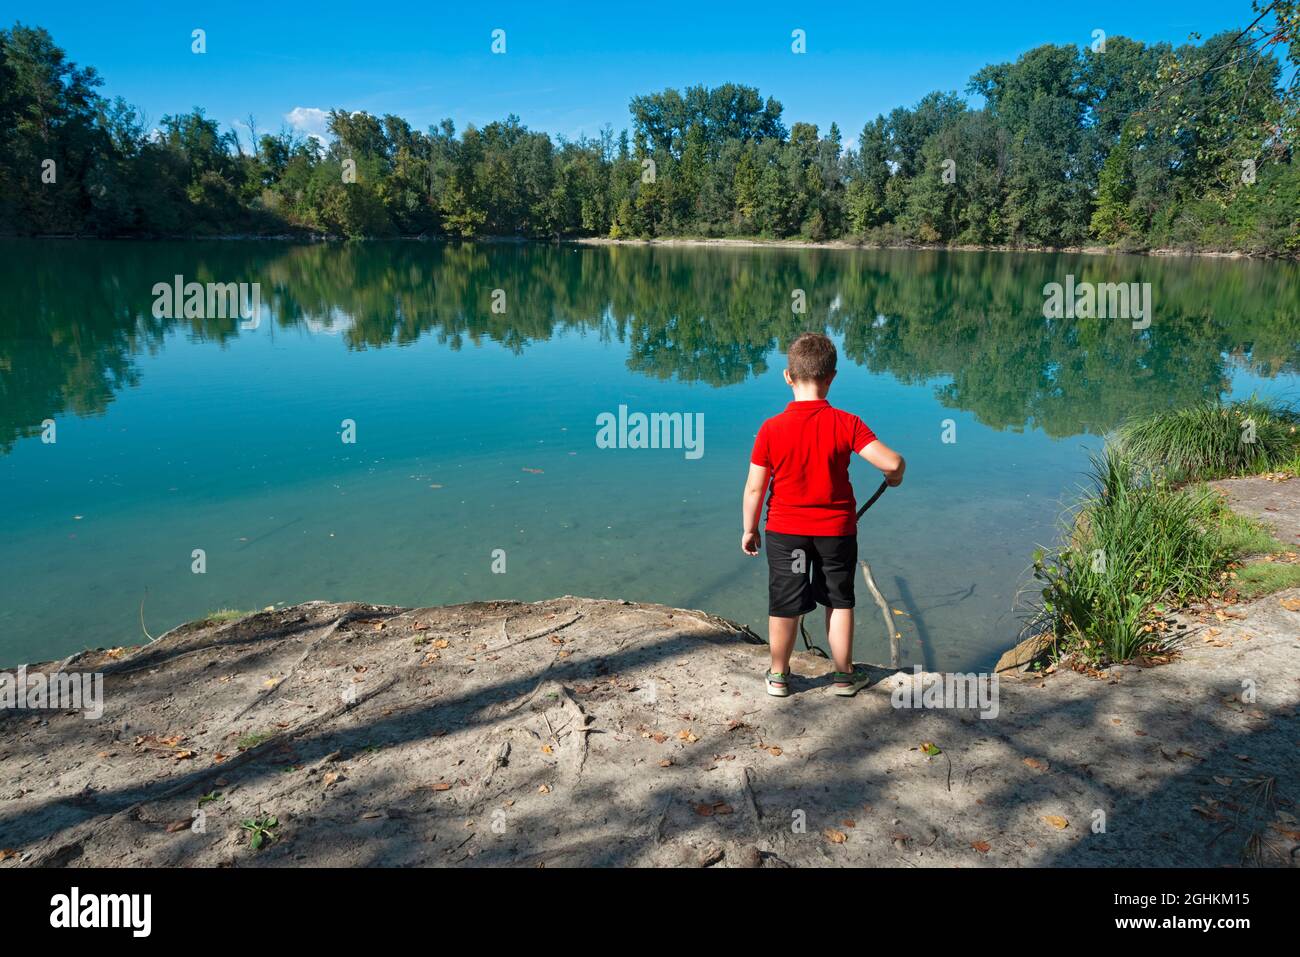 Italy, Lombardy, Ricengo, Lake of the Reflections, Chosen by the Director Luca Guadagnino for the Bathroom Scene of the Film Call Me by Your Name Stock Photo